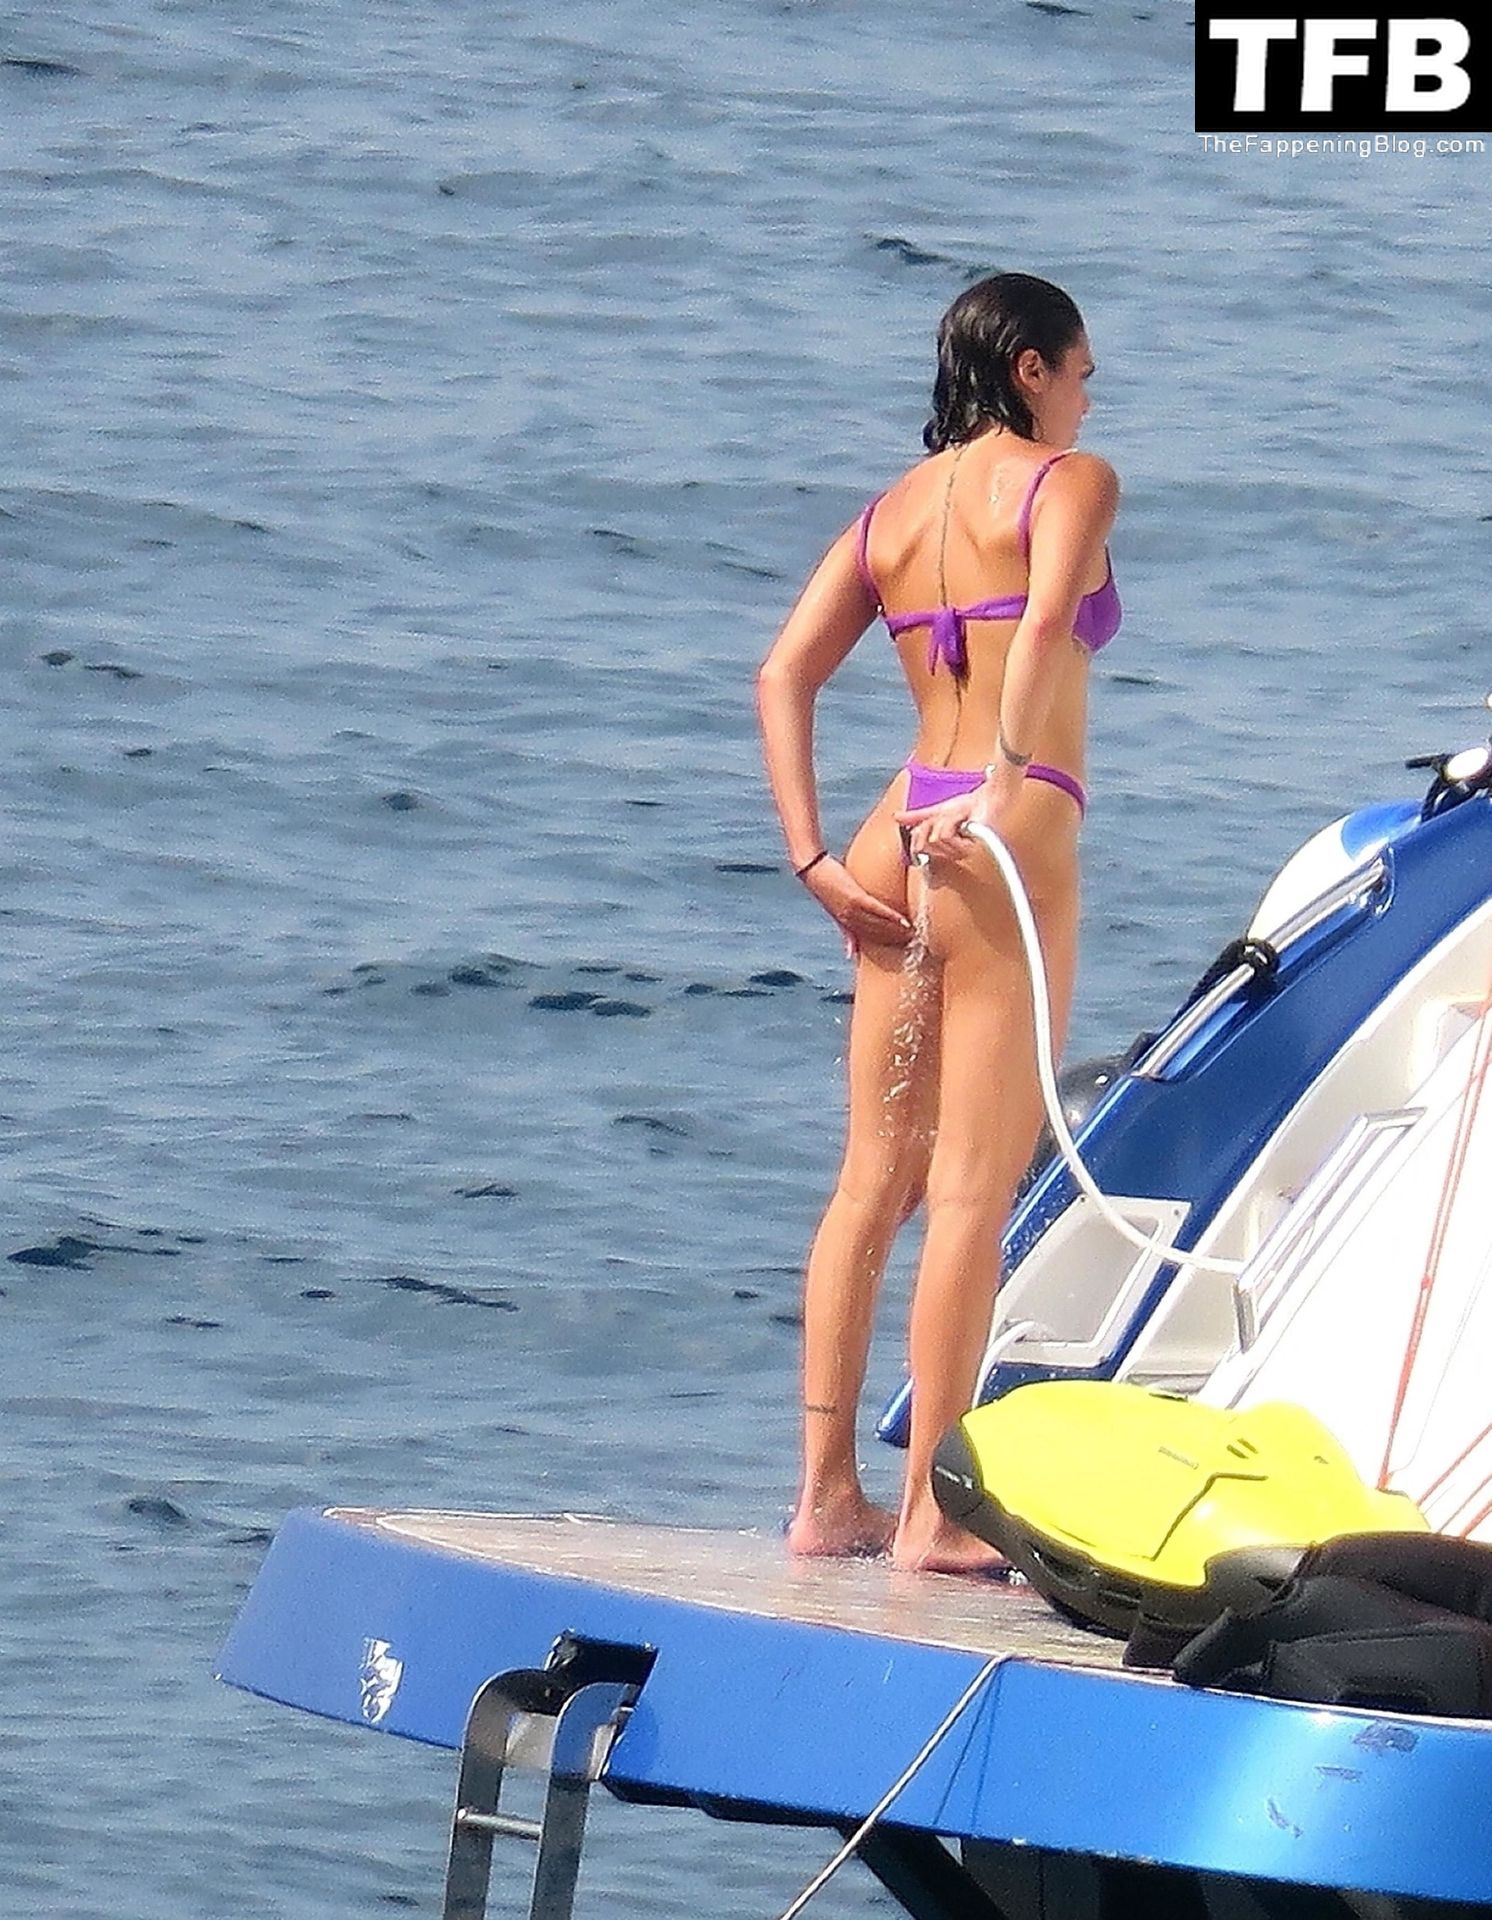 Ruben Dias Packs on the PDA with a Mysterious Scantily-Clad Woman on a Boat in Formentera (32 Photos)